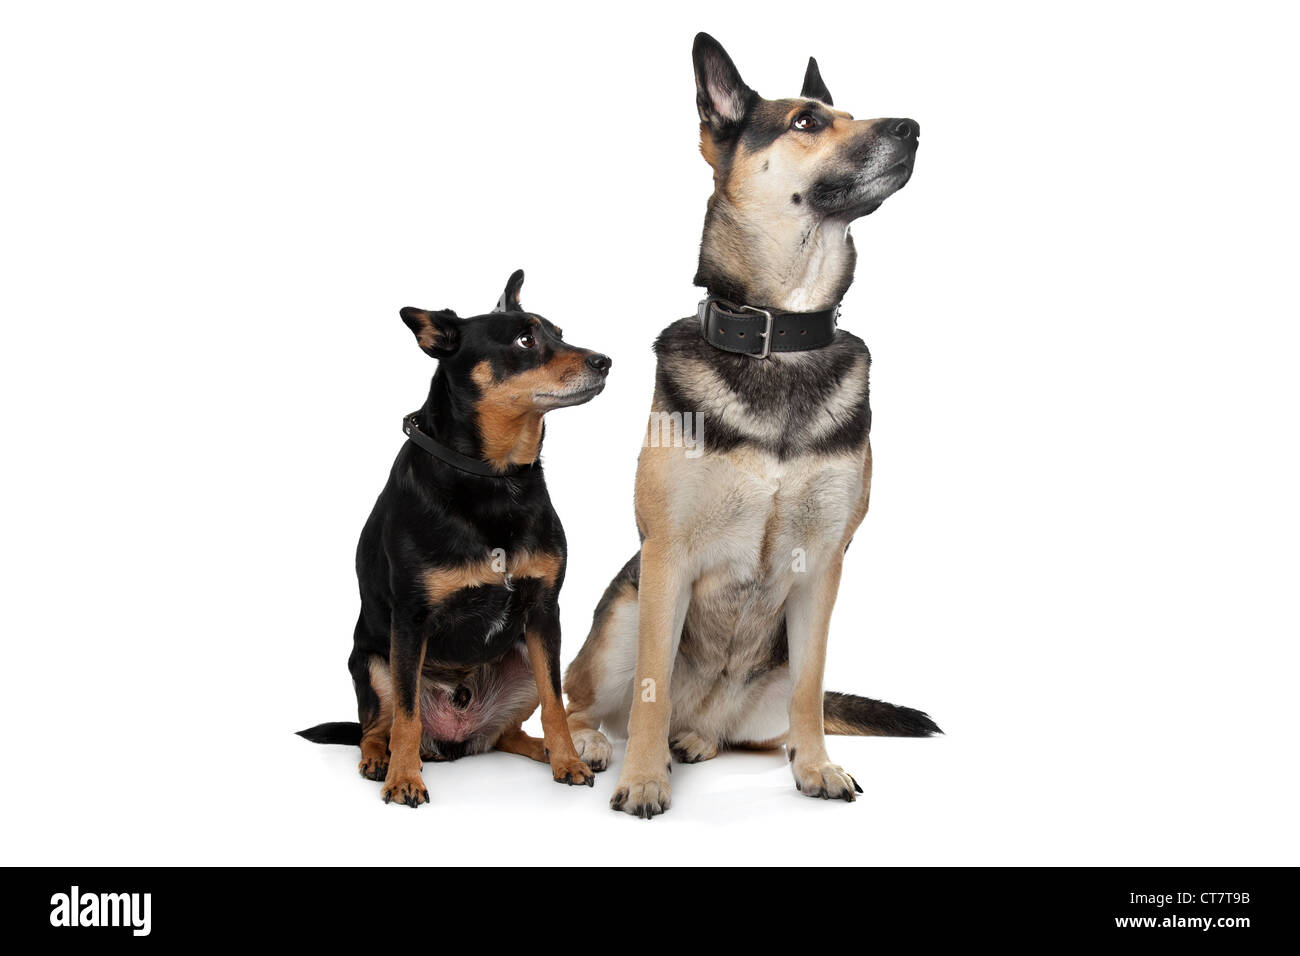 Two mixed breed dogs in front of a white background Stock Photo